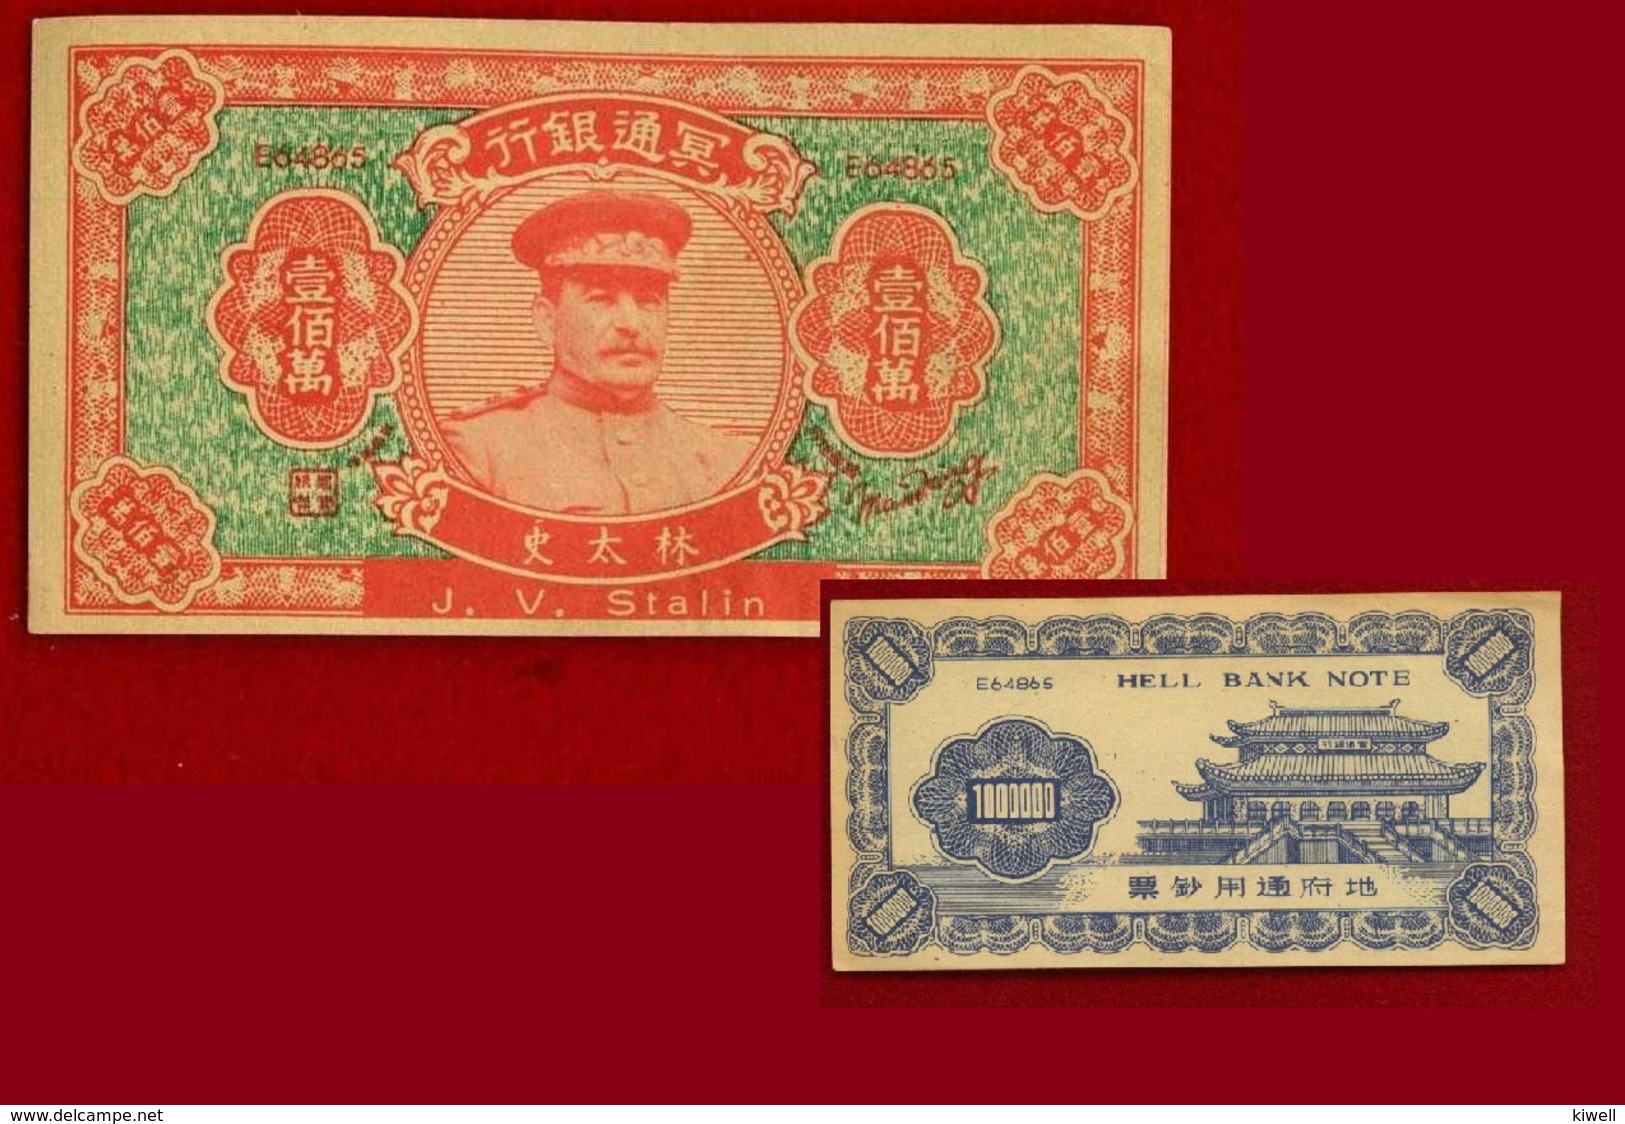 CHINA.Josef Stalin.Hell Bank Notes.UNC.** - Russia